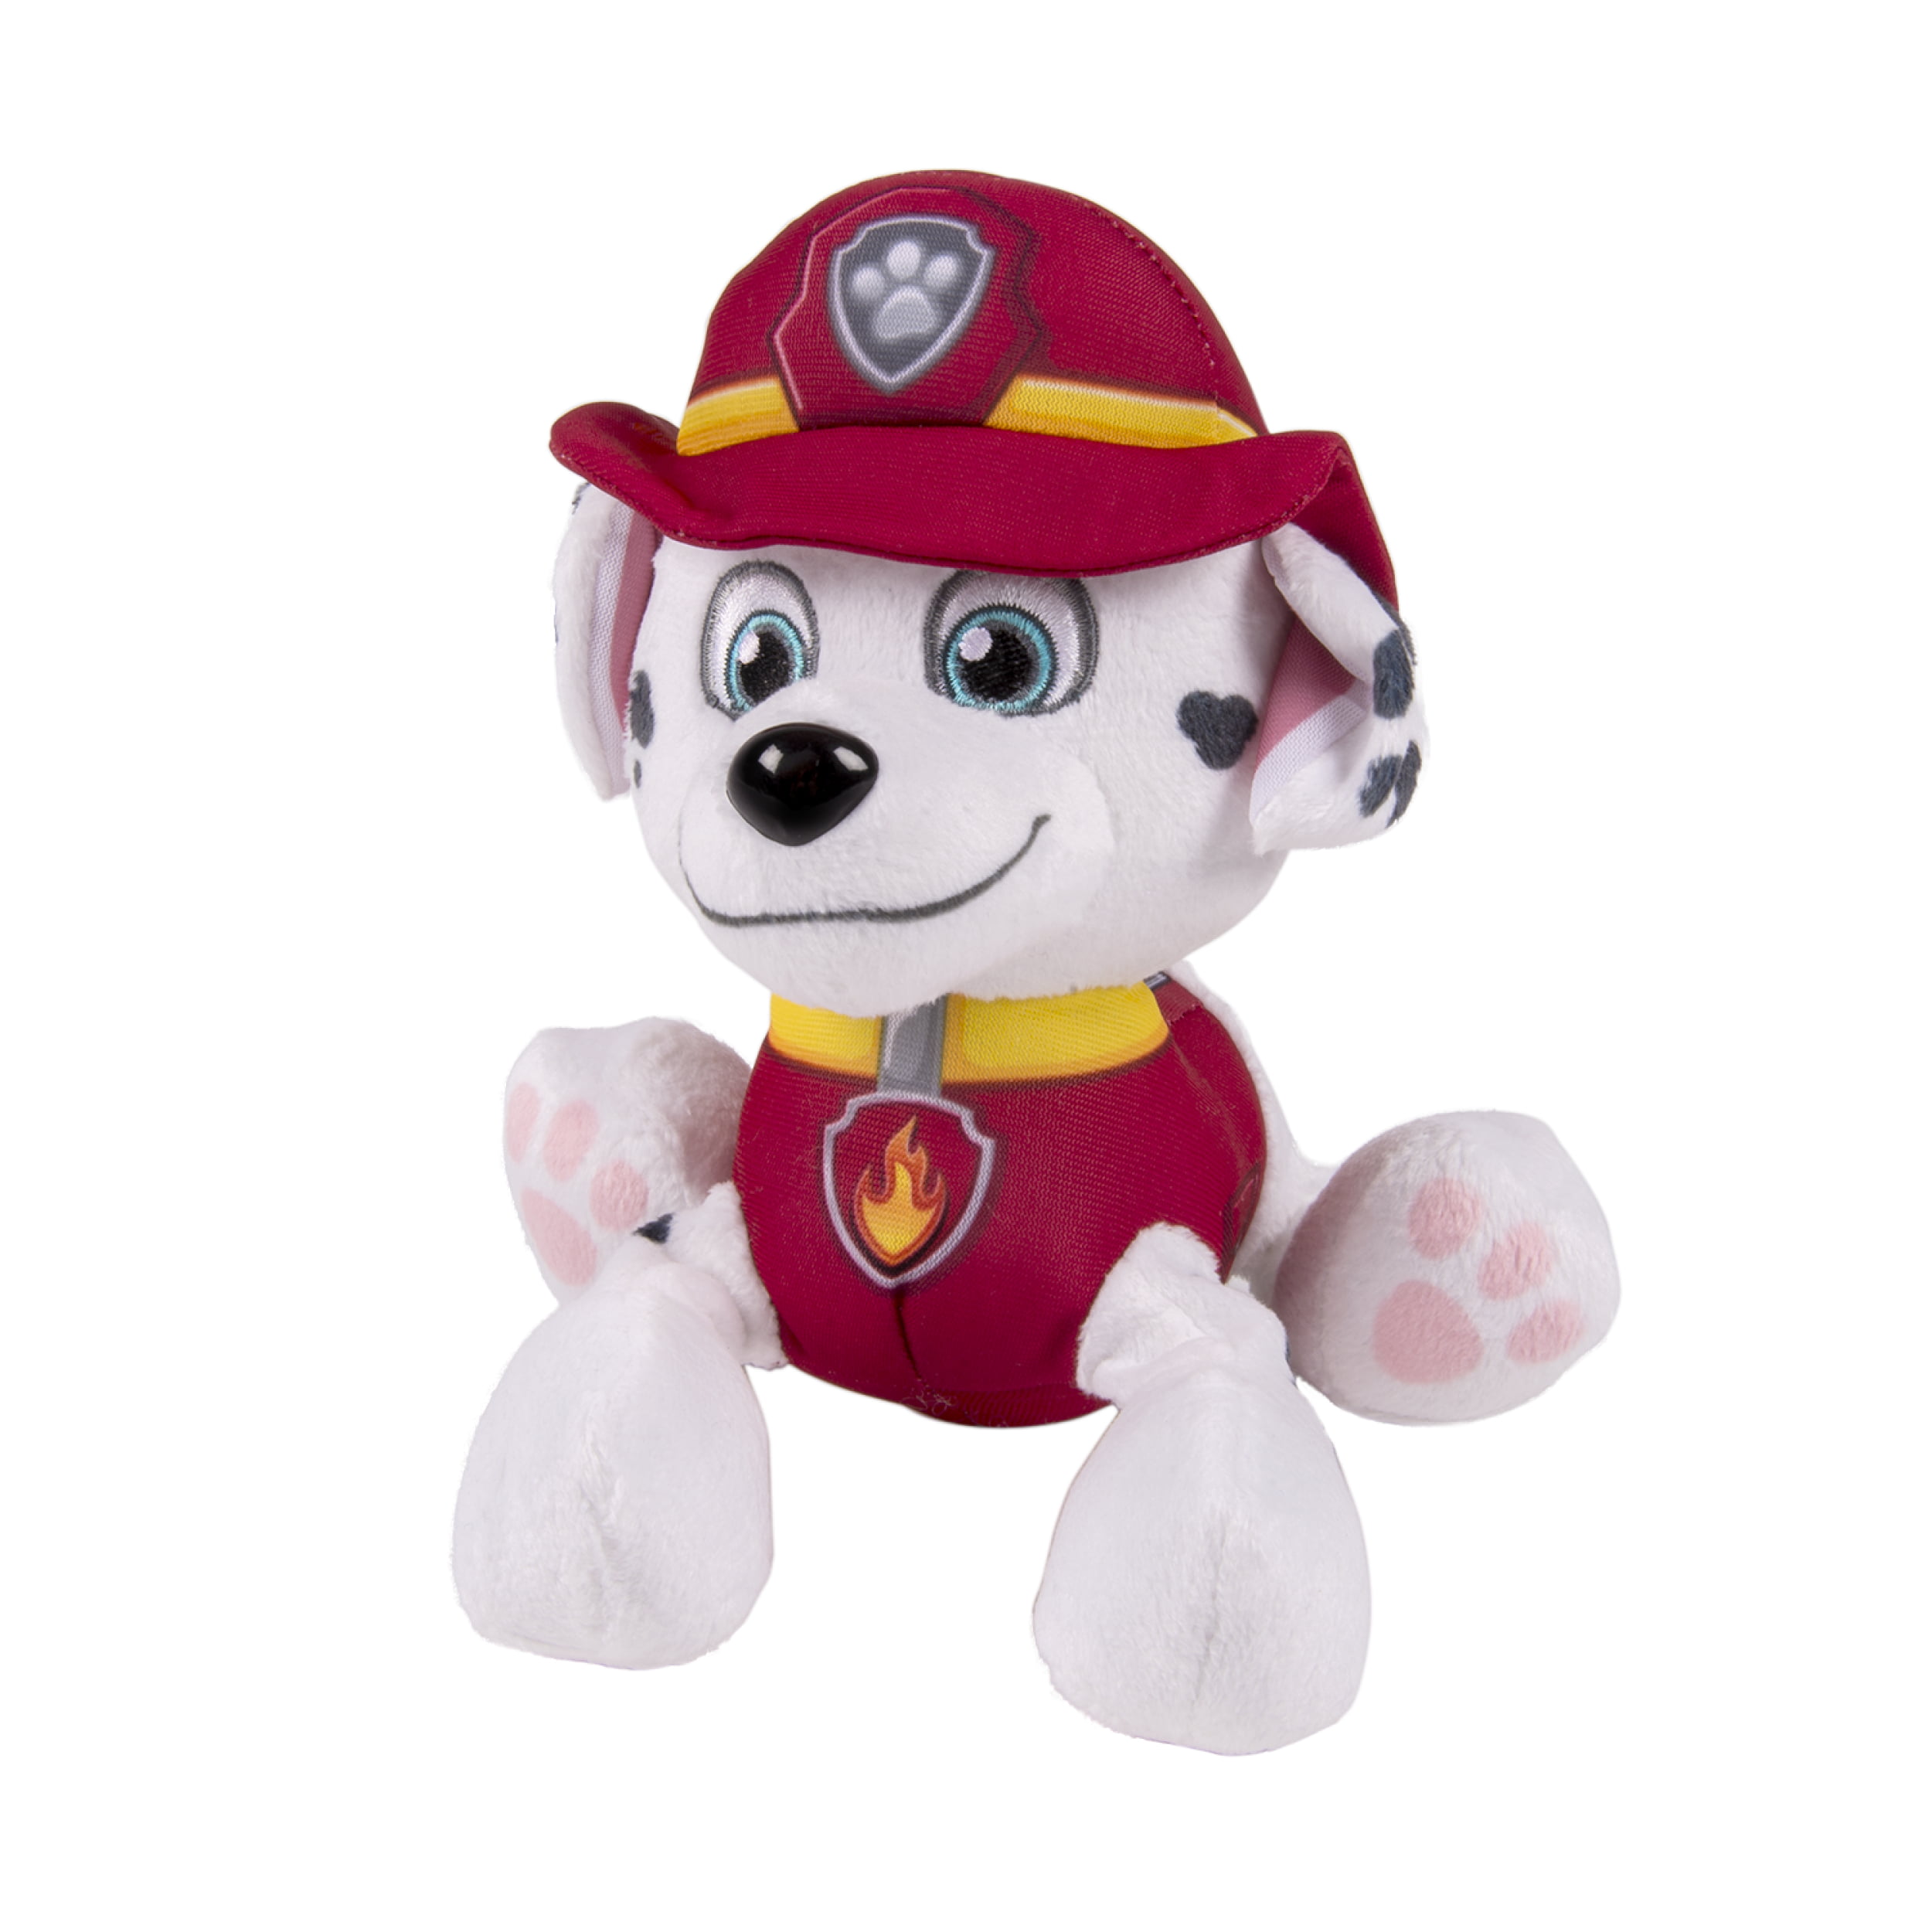 add 2 to cart Paw Patrol 8" Plush Pup Pals---Authentic!!! Buy 1 Get 1 25% OFF 